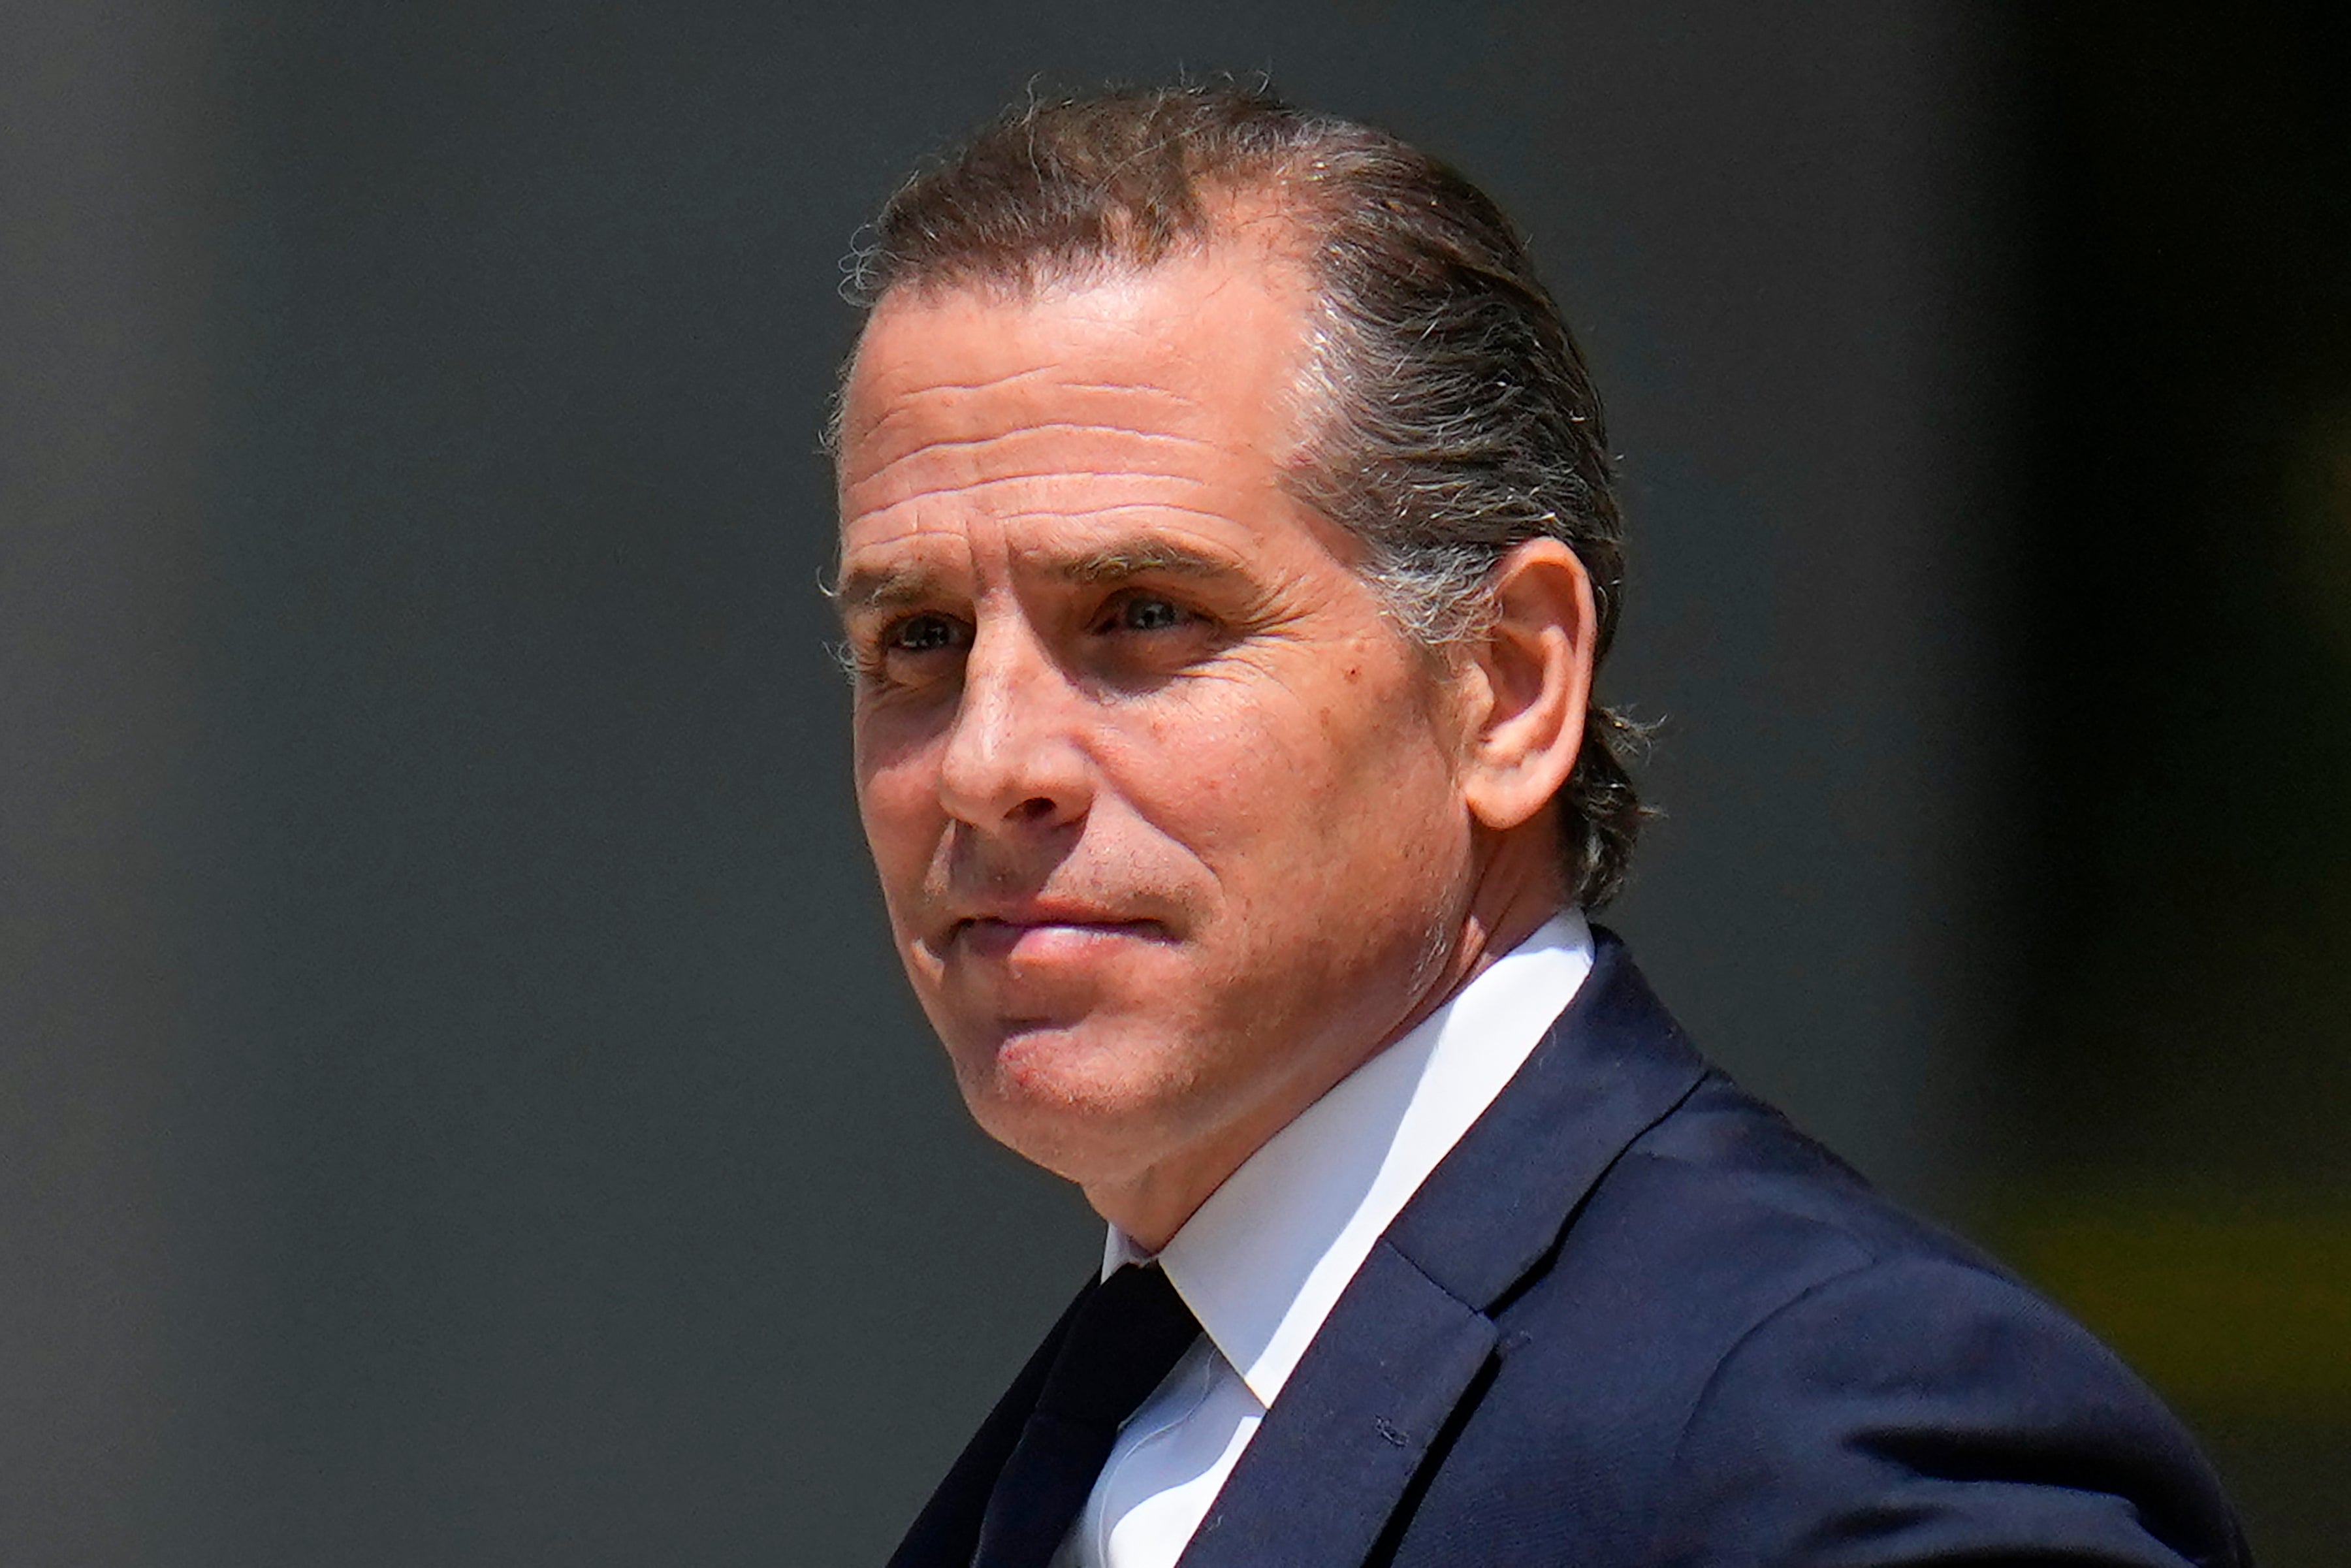 Hunter Biden is facing a total of 12 criminal charges